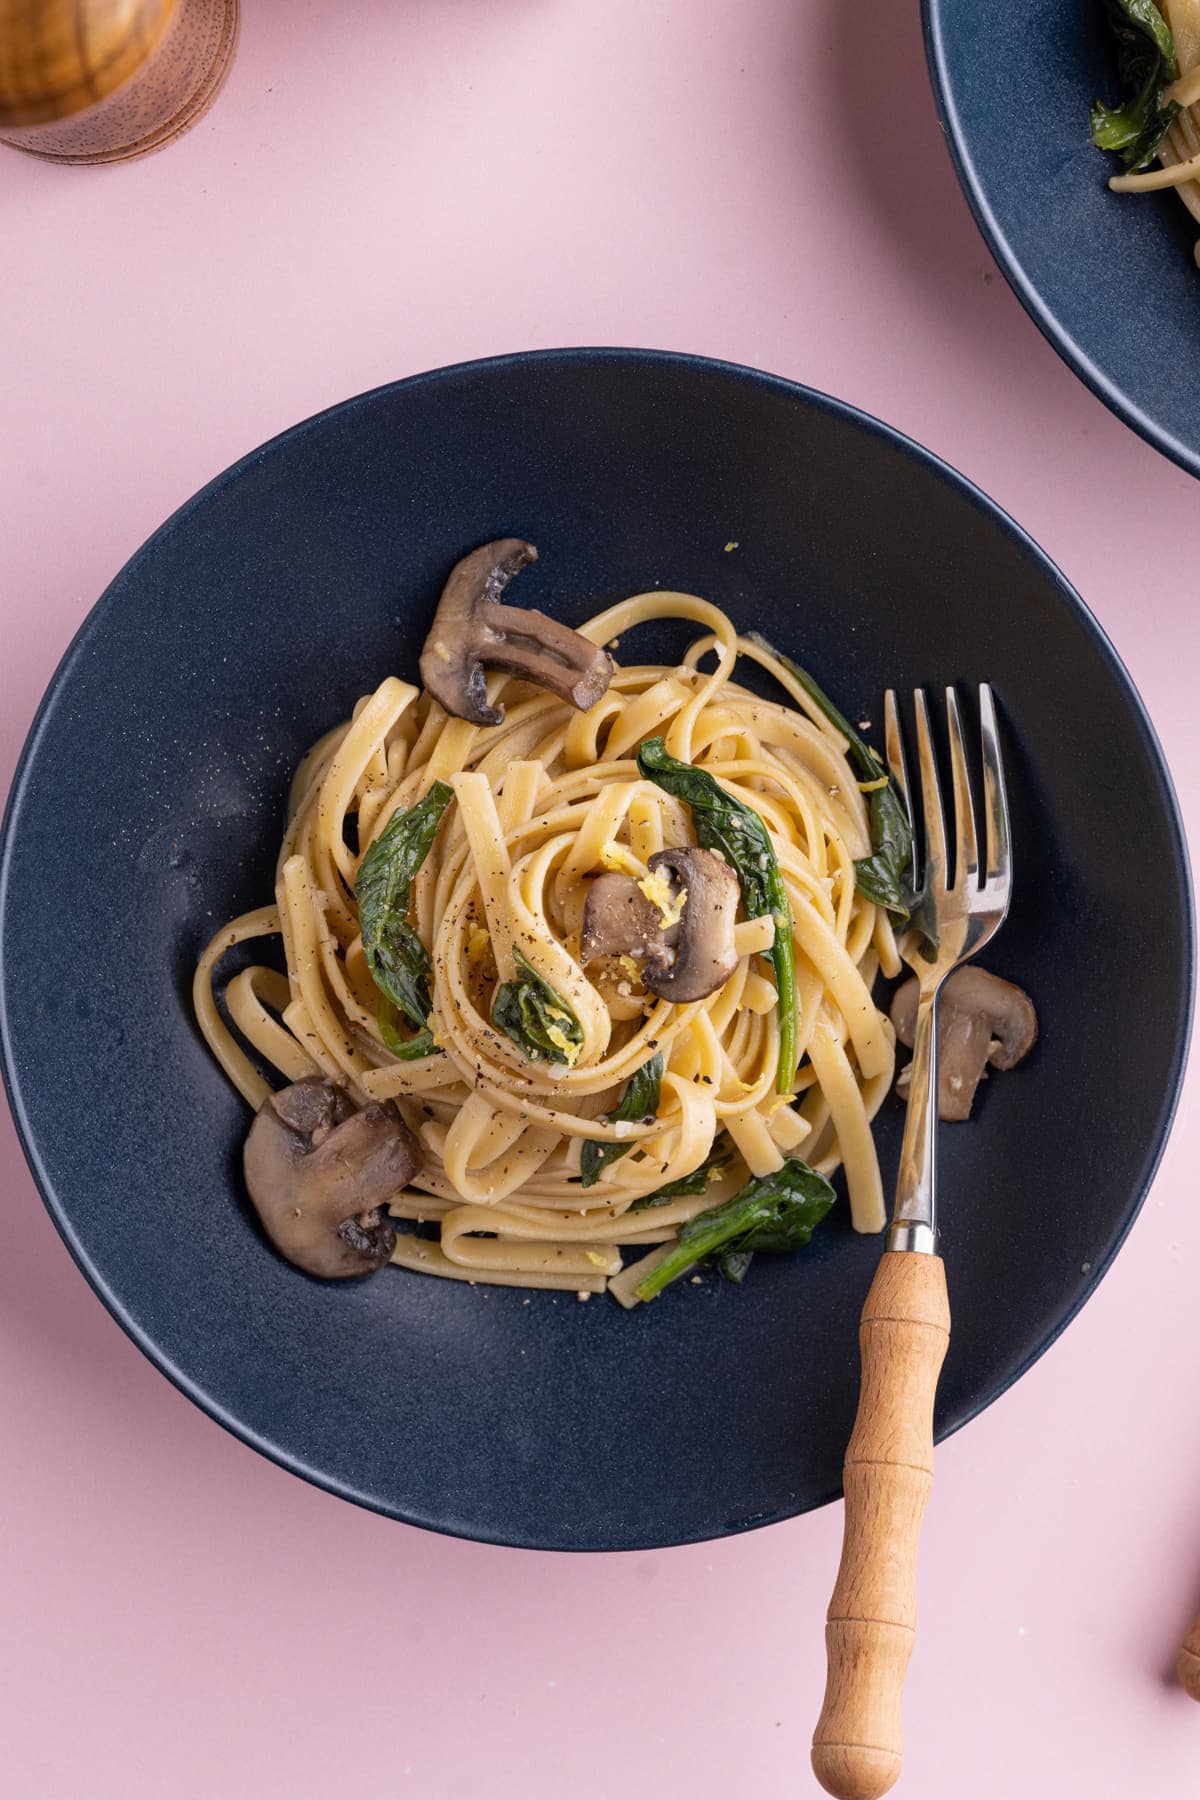 Mushroom Spinach Pasta in a shallow navy blue bowl